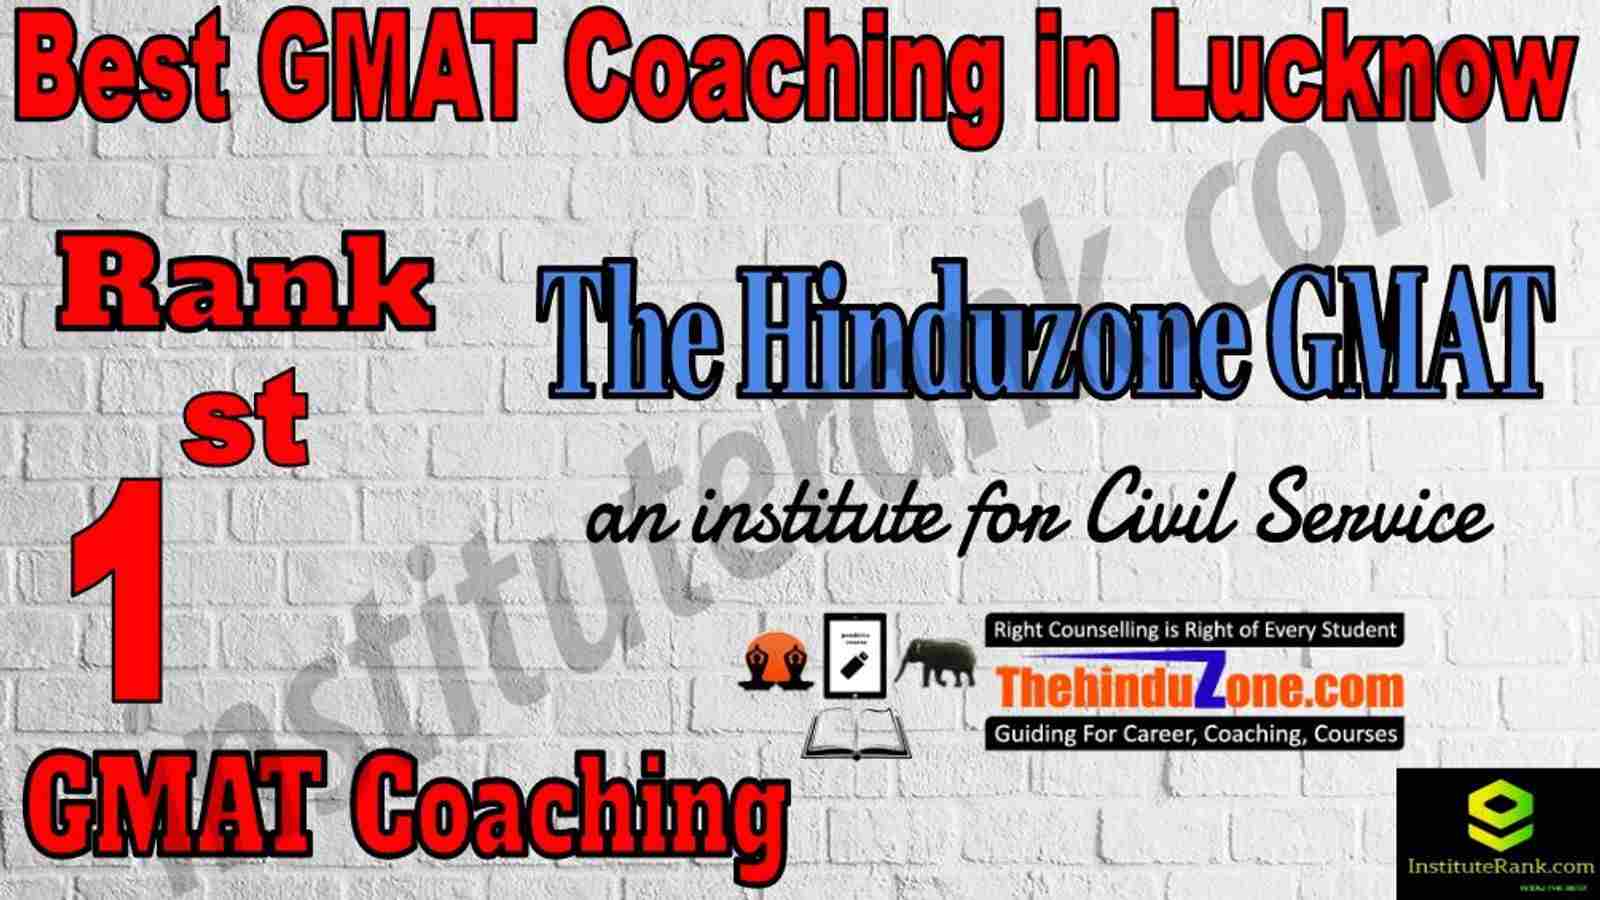 1st Best GMAT Coaching in Lucknow